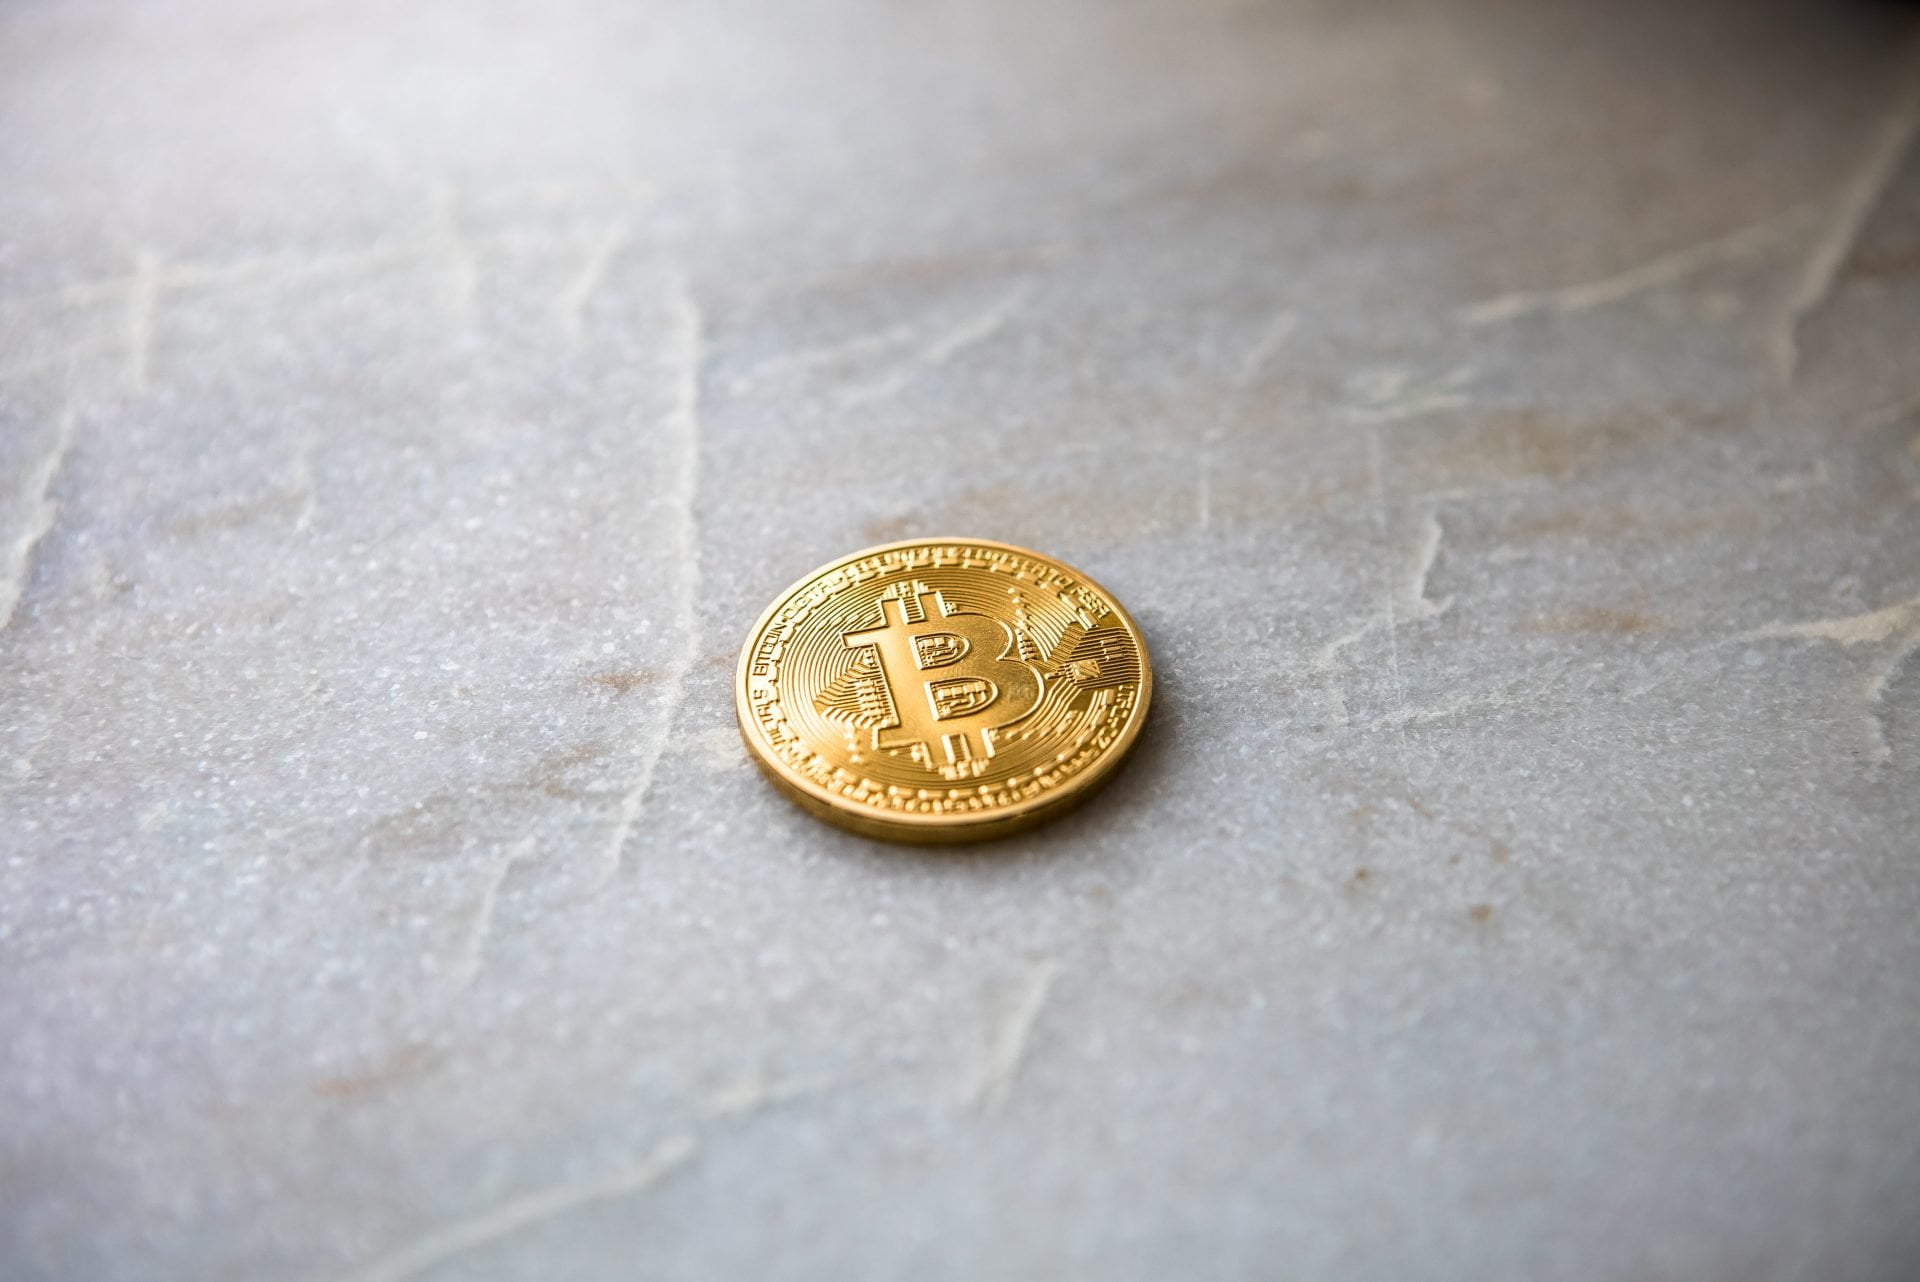 Institutional Bitcoin Interest Wanes as BTC Price Falls Under $10,000 27